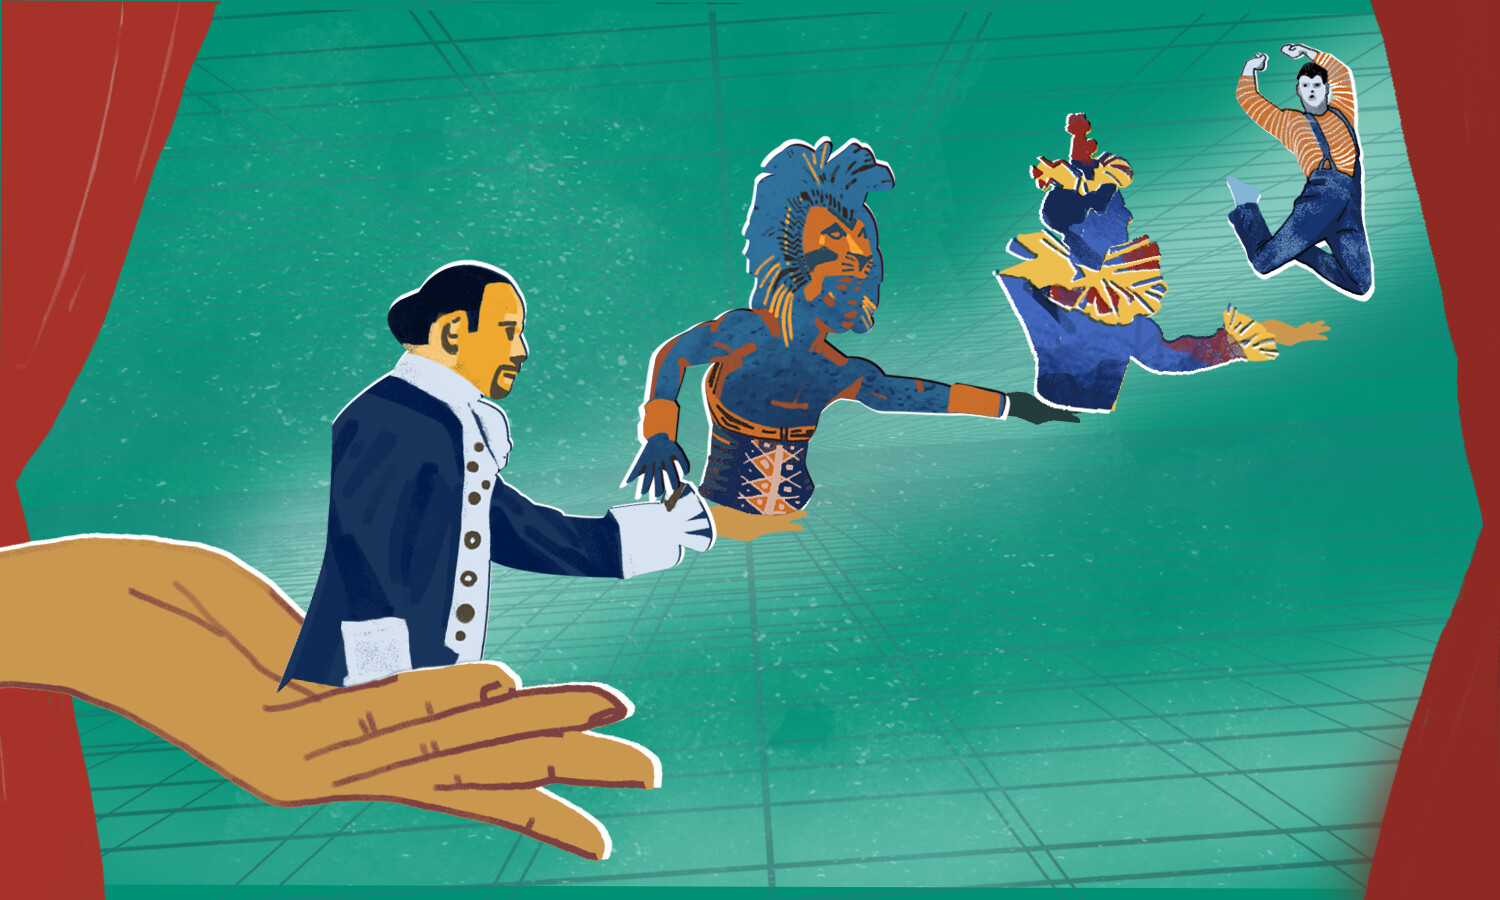 An image of a hand, and in its palm is a shakespearean actor with his arm extended offering an actor from the Lion King, who is offering a clown, who offers a leaping person. They appear in front of a teal background that is bordered by red curtains. 